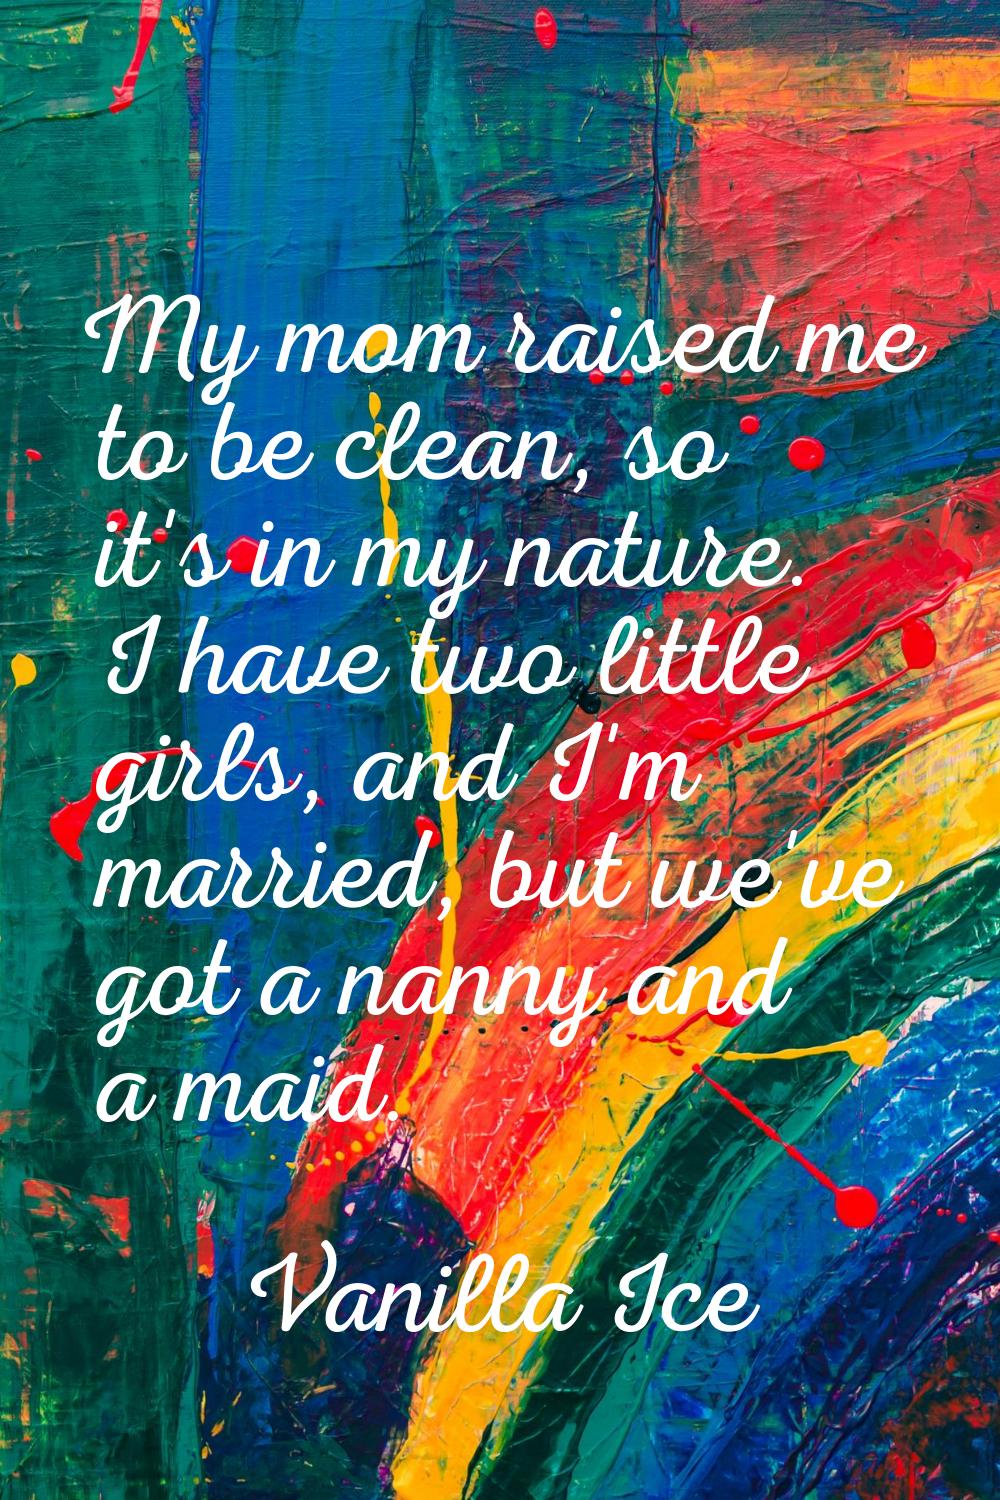 My mom raised me to be clean, so it's in my nature. I have two little girls, and I'm married, but w